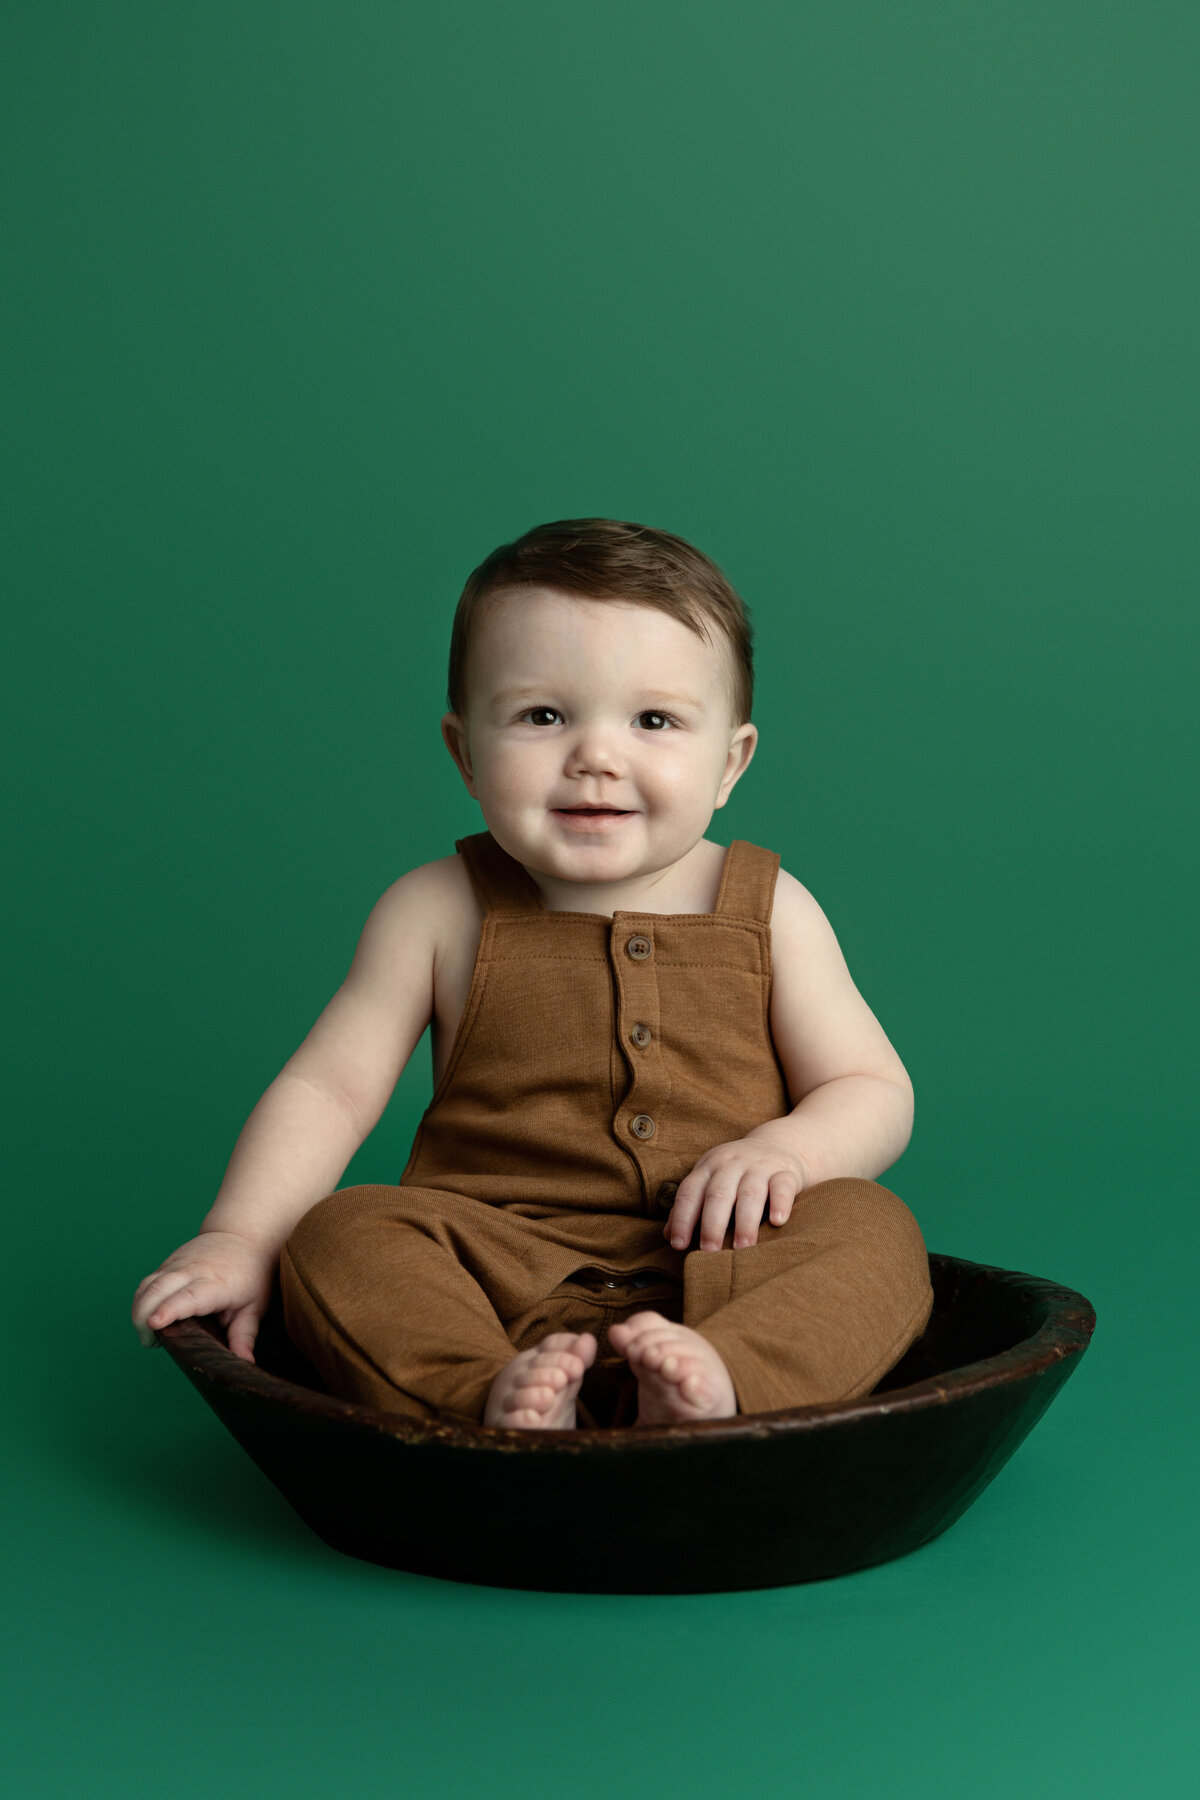 A toddler boy in brown overalls sits in a wooden bowl in a green photo studio